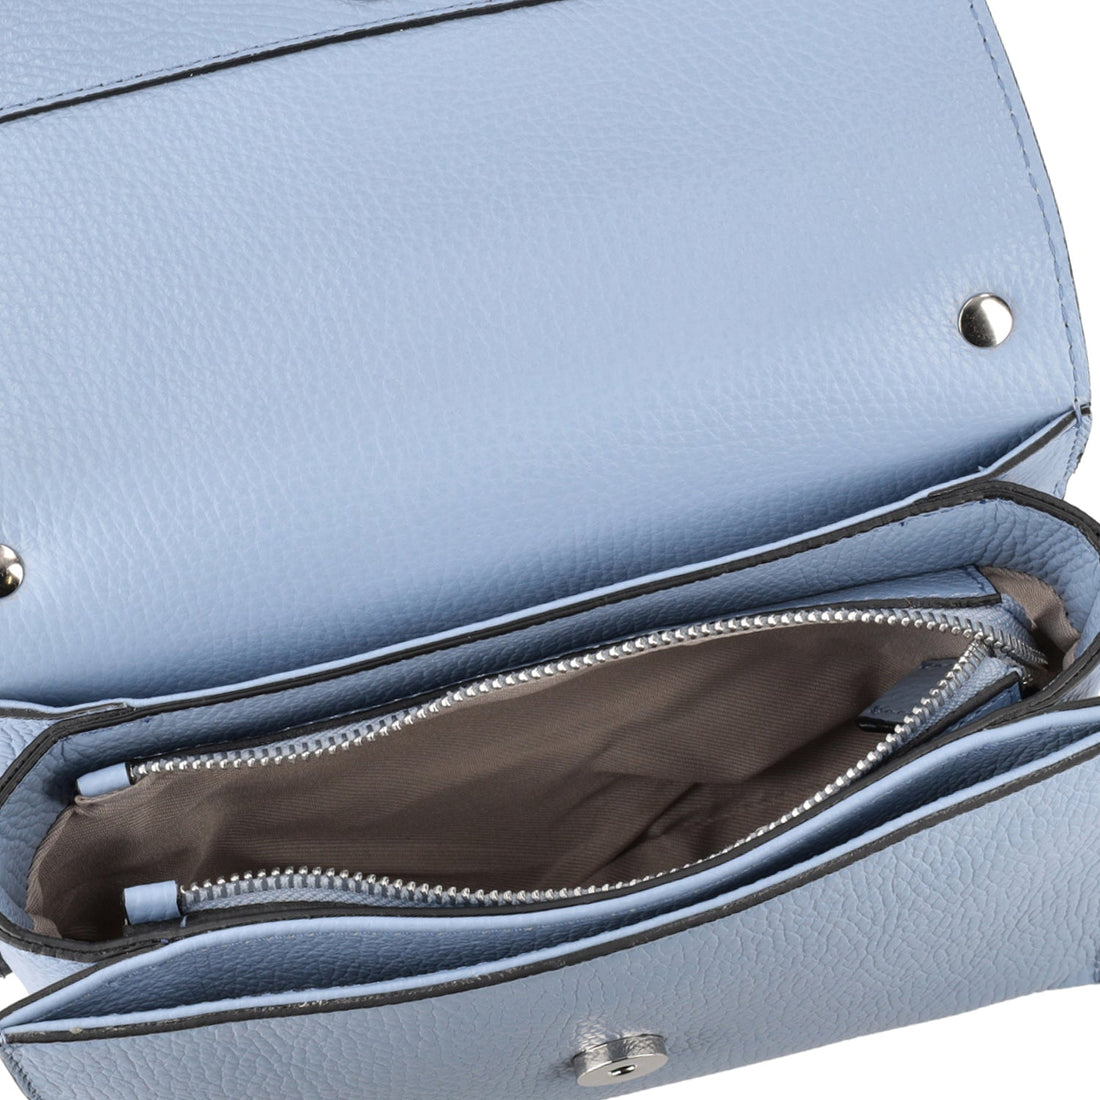 LIGHT BLUE NARCISO HAND BAG IN LEATHER WITH SHOULDER STRAP